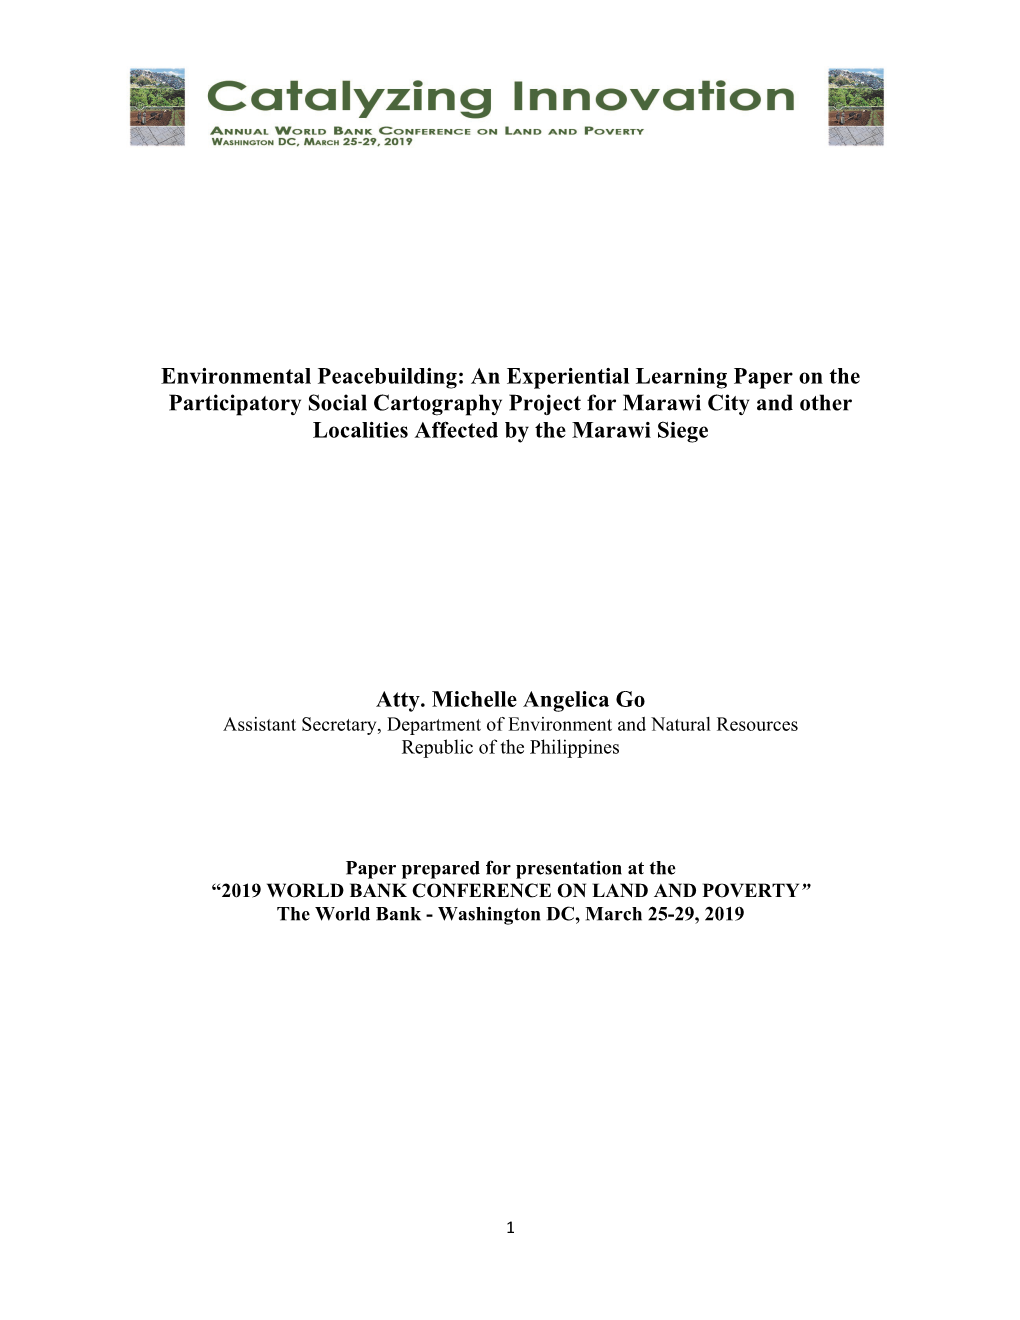 Environmental Peacebuilding: an Experiential Learning Paper on The